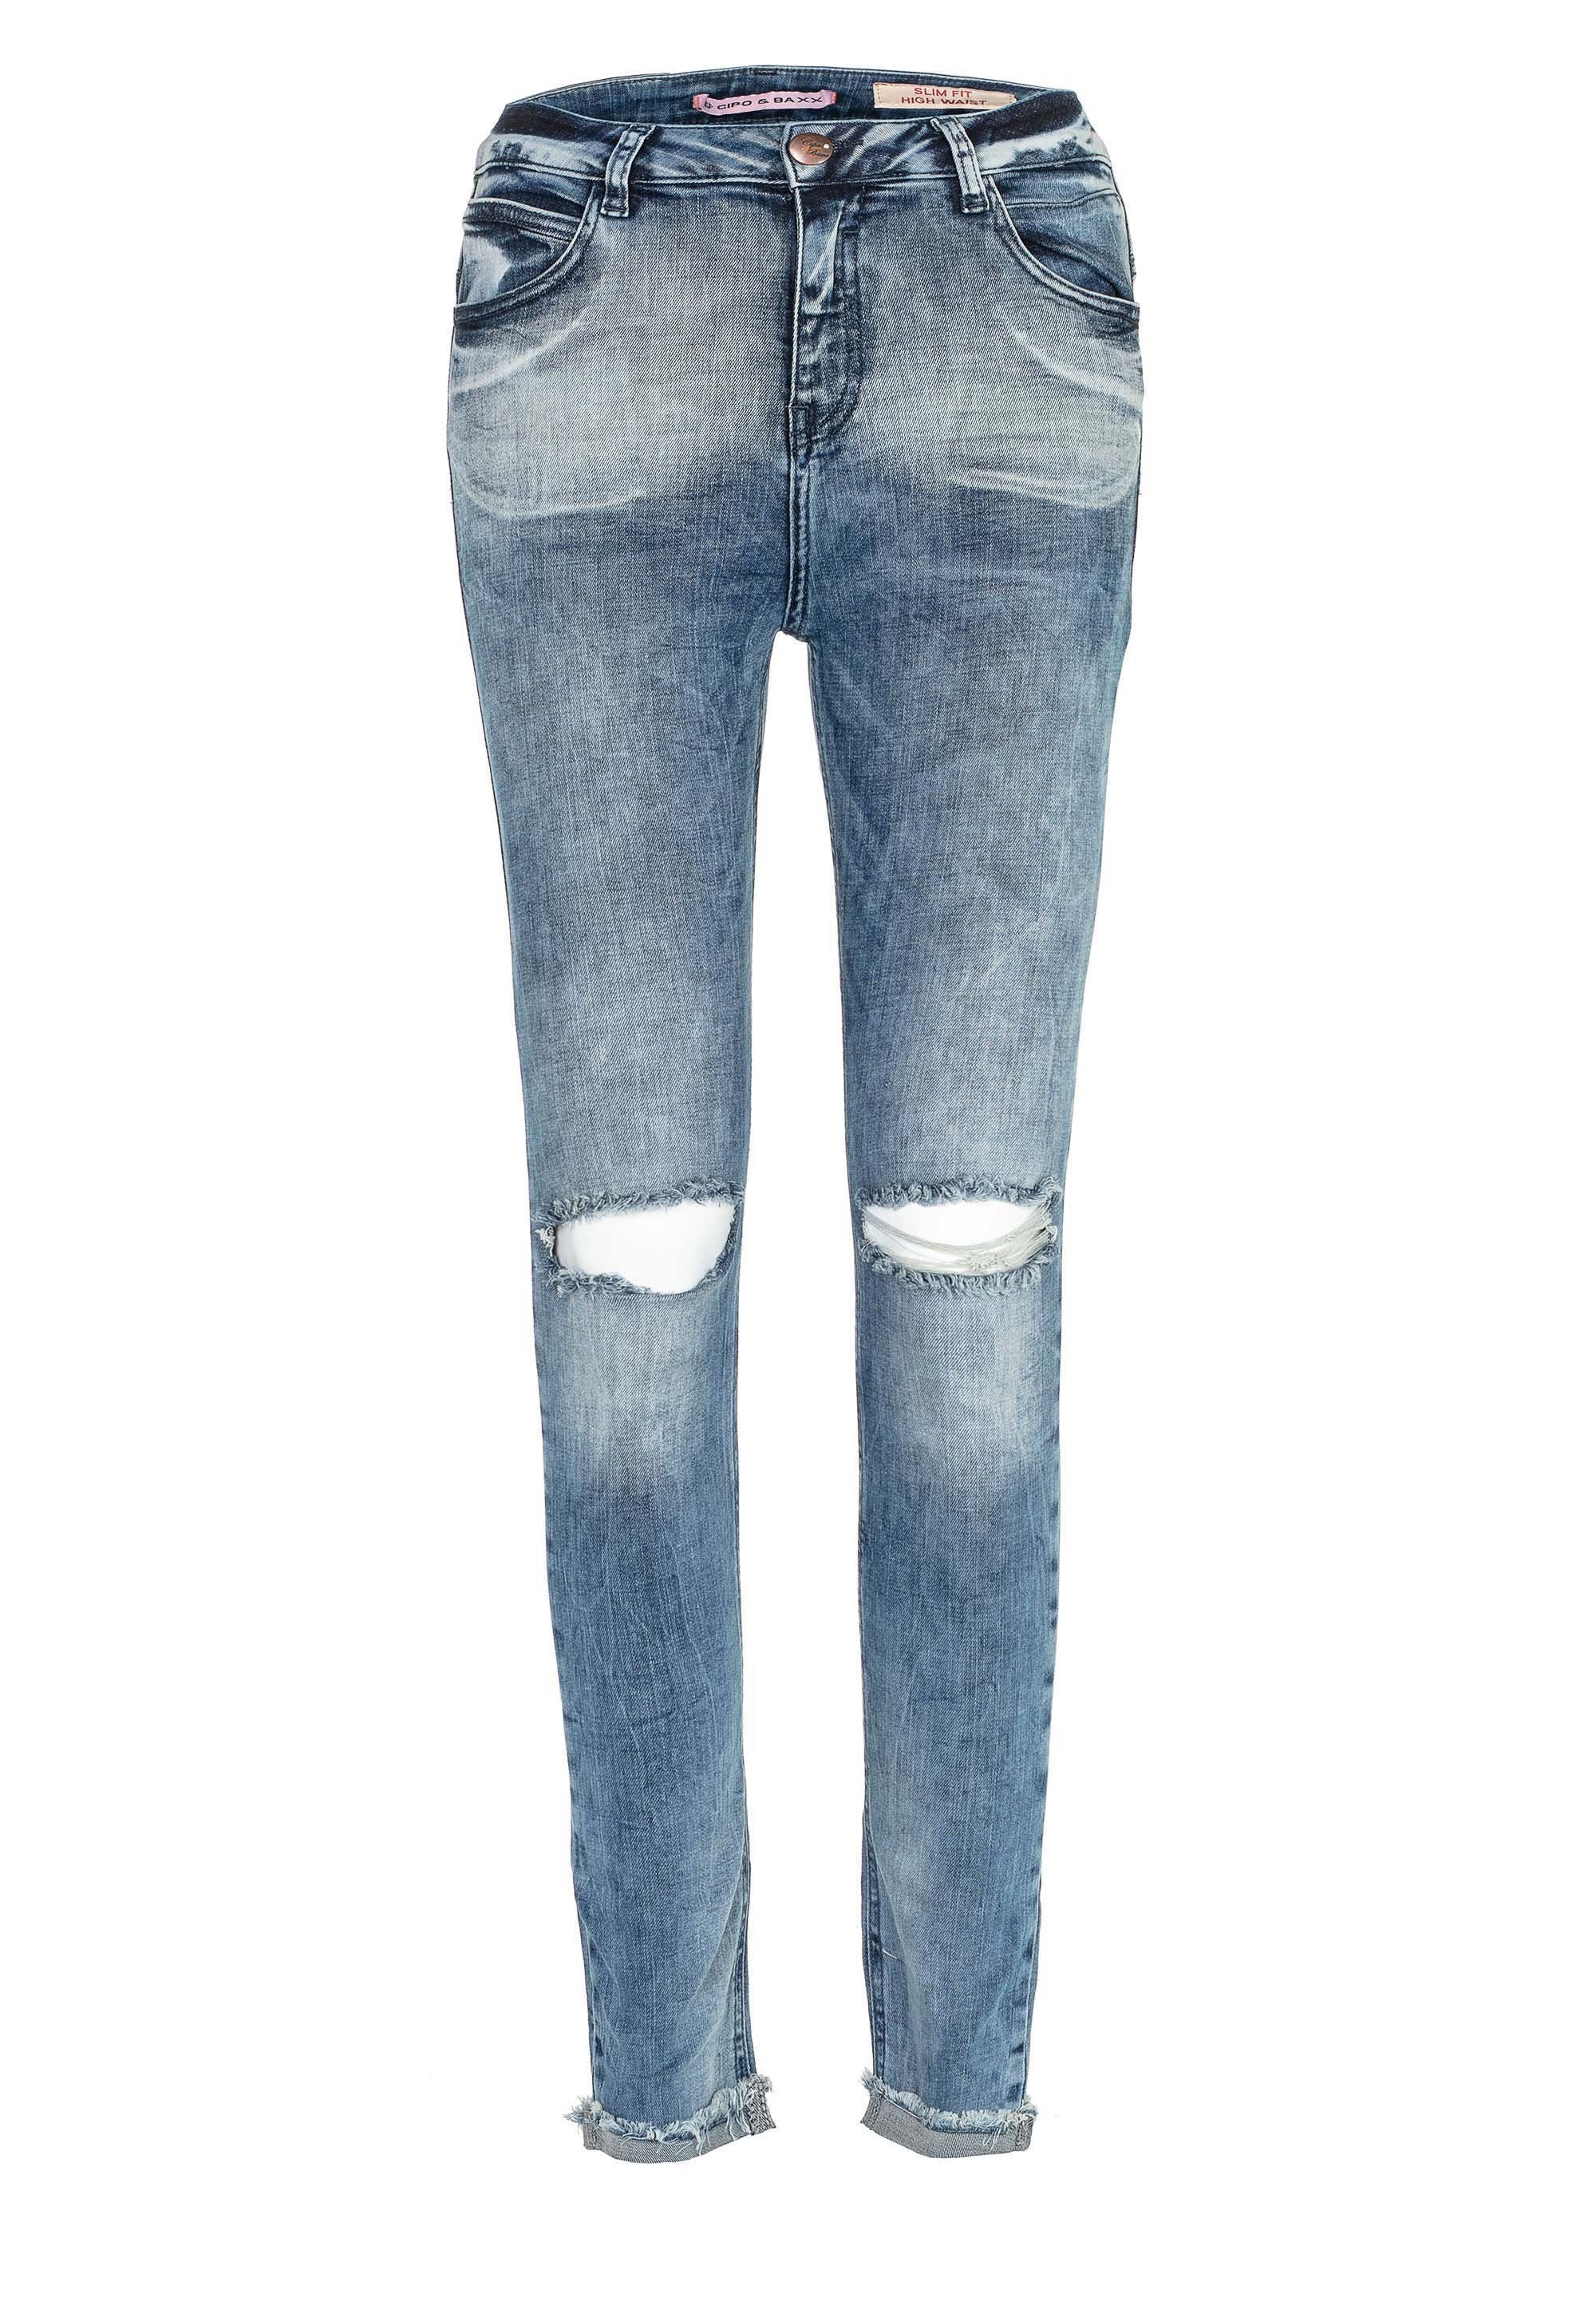 Cipo & Baxx Slim-fit-Jeans mit coolen Cut-Outs in Hight Waist